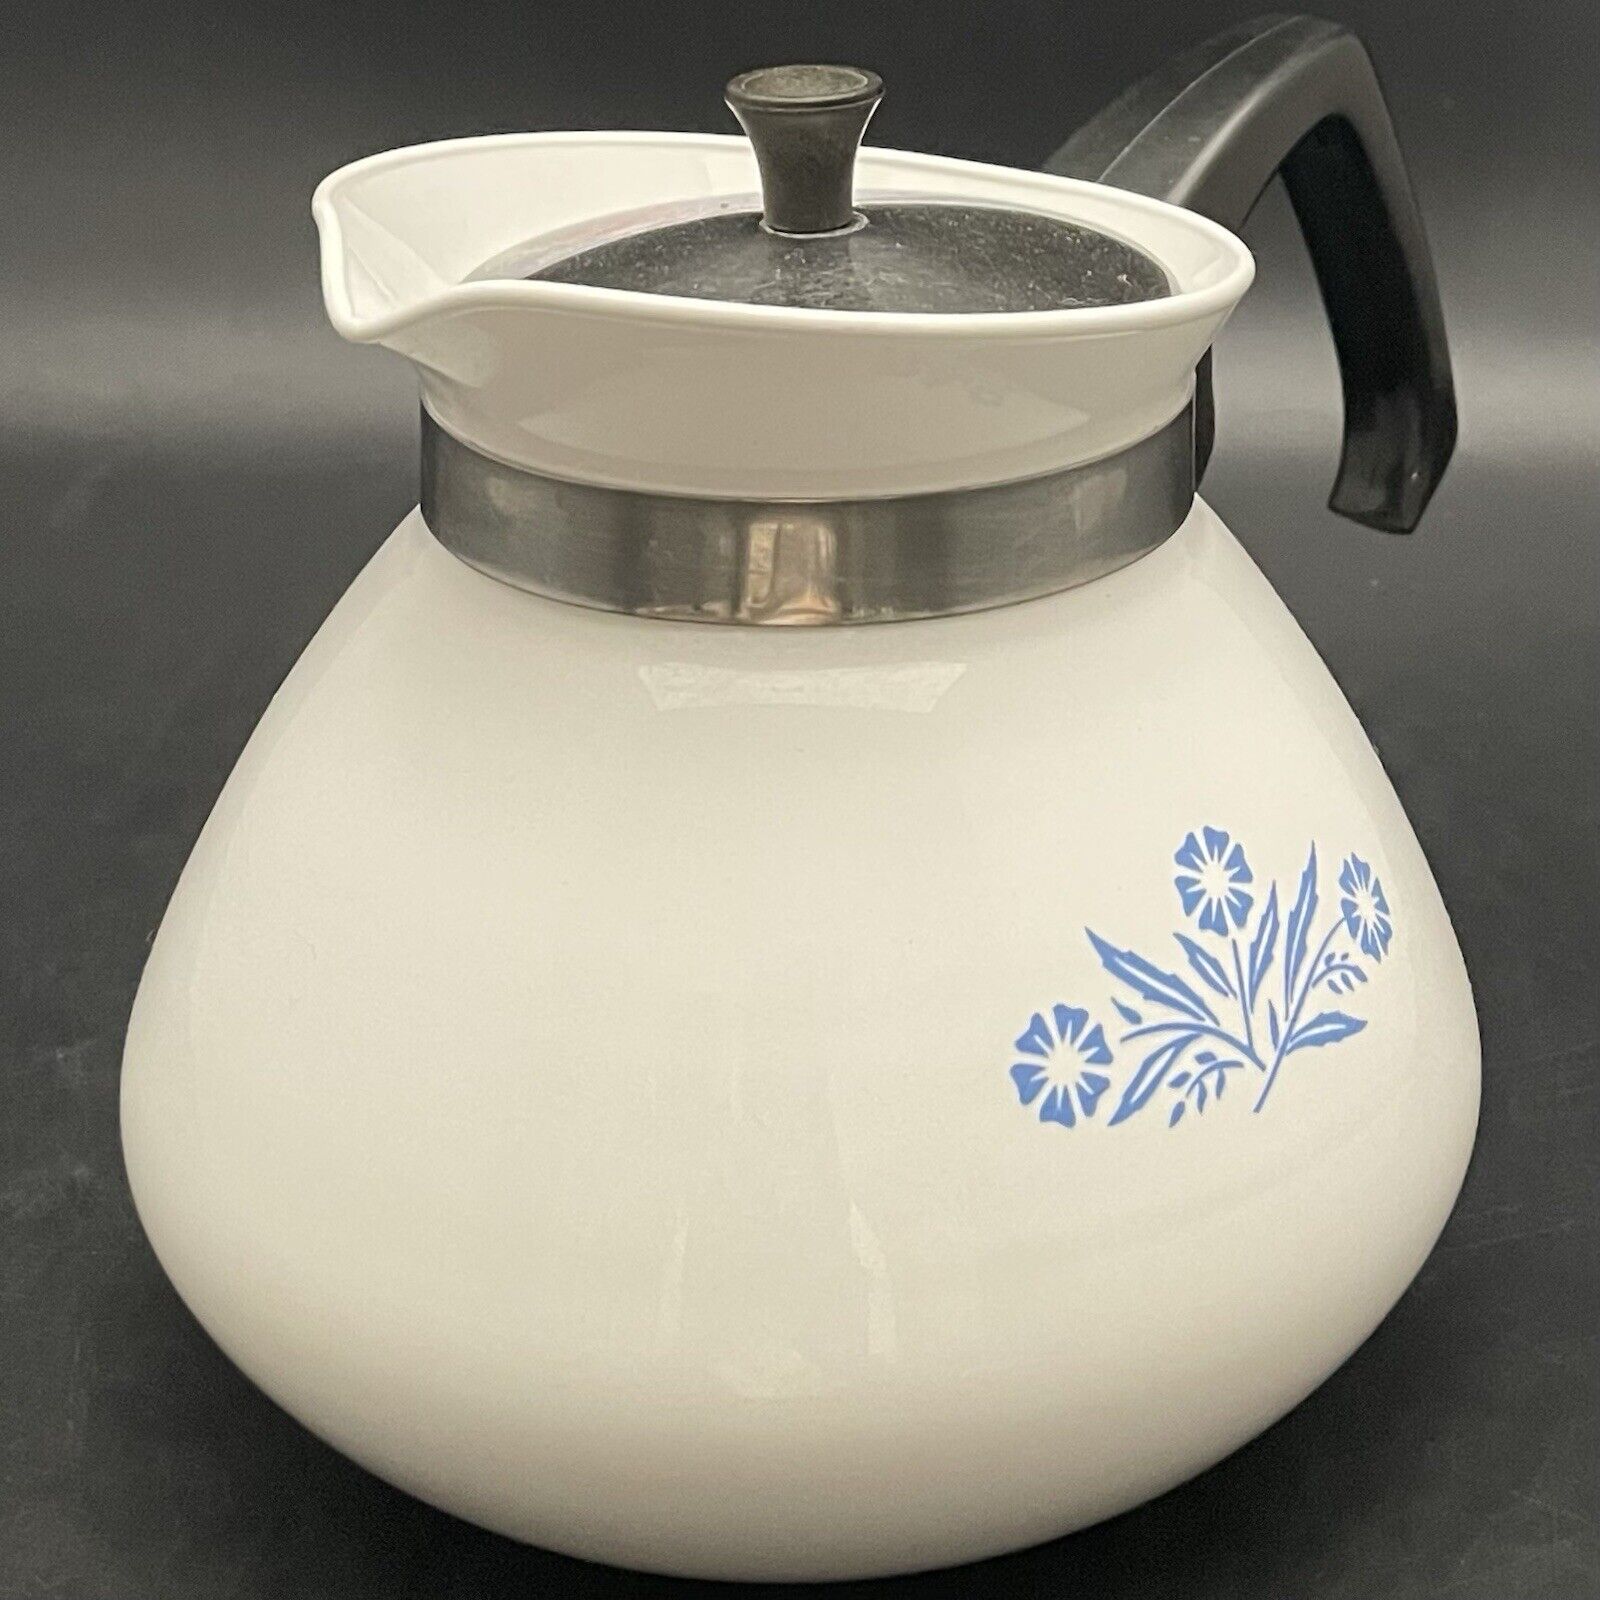 Corning Ware Blue Cornflower 6 Cup Tea Kettle with Lid circa 1960s Made in USA